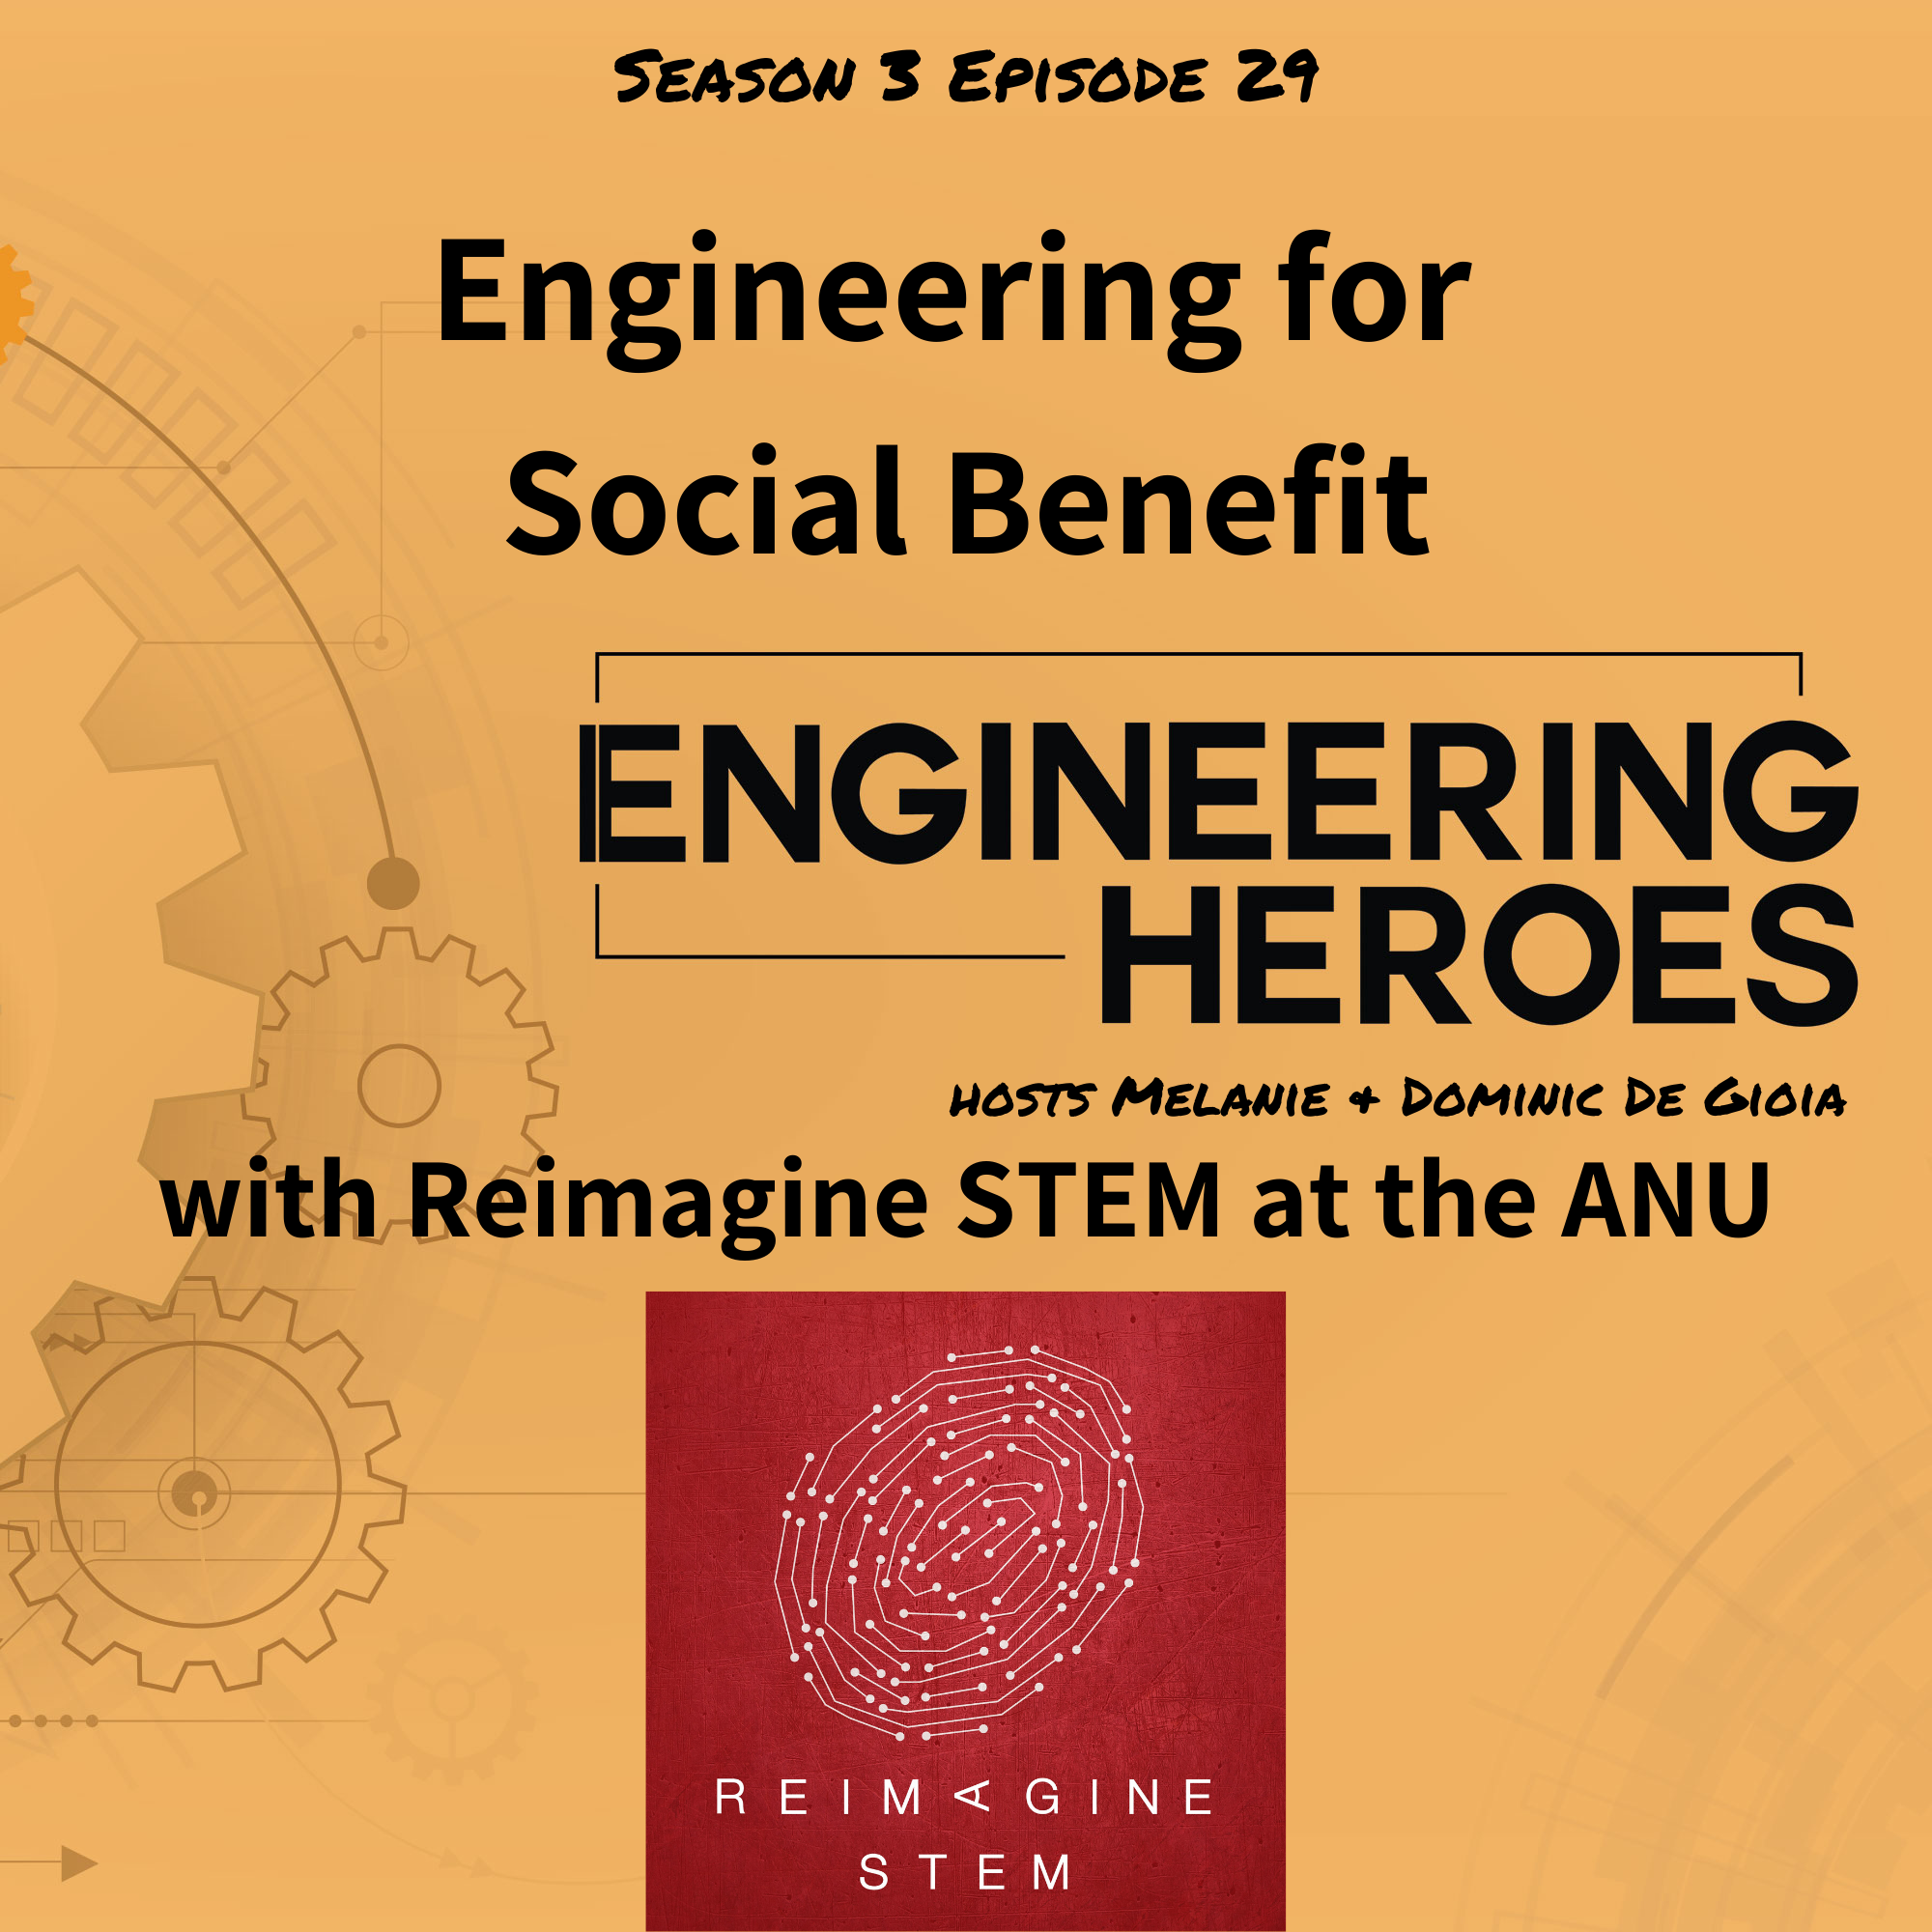 Engineering for Social Benefit with Reimagine STEM at the ANU